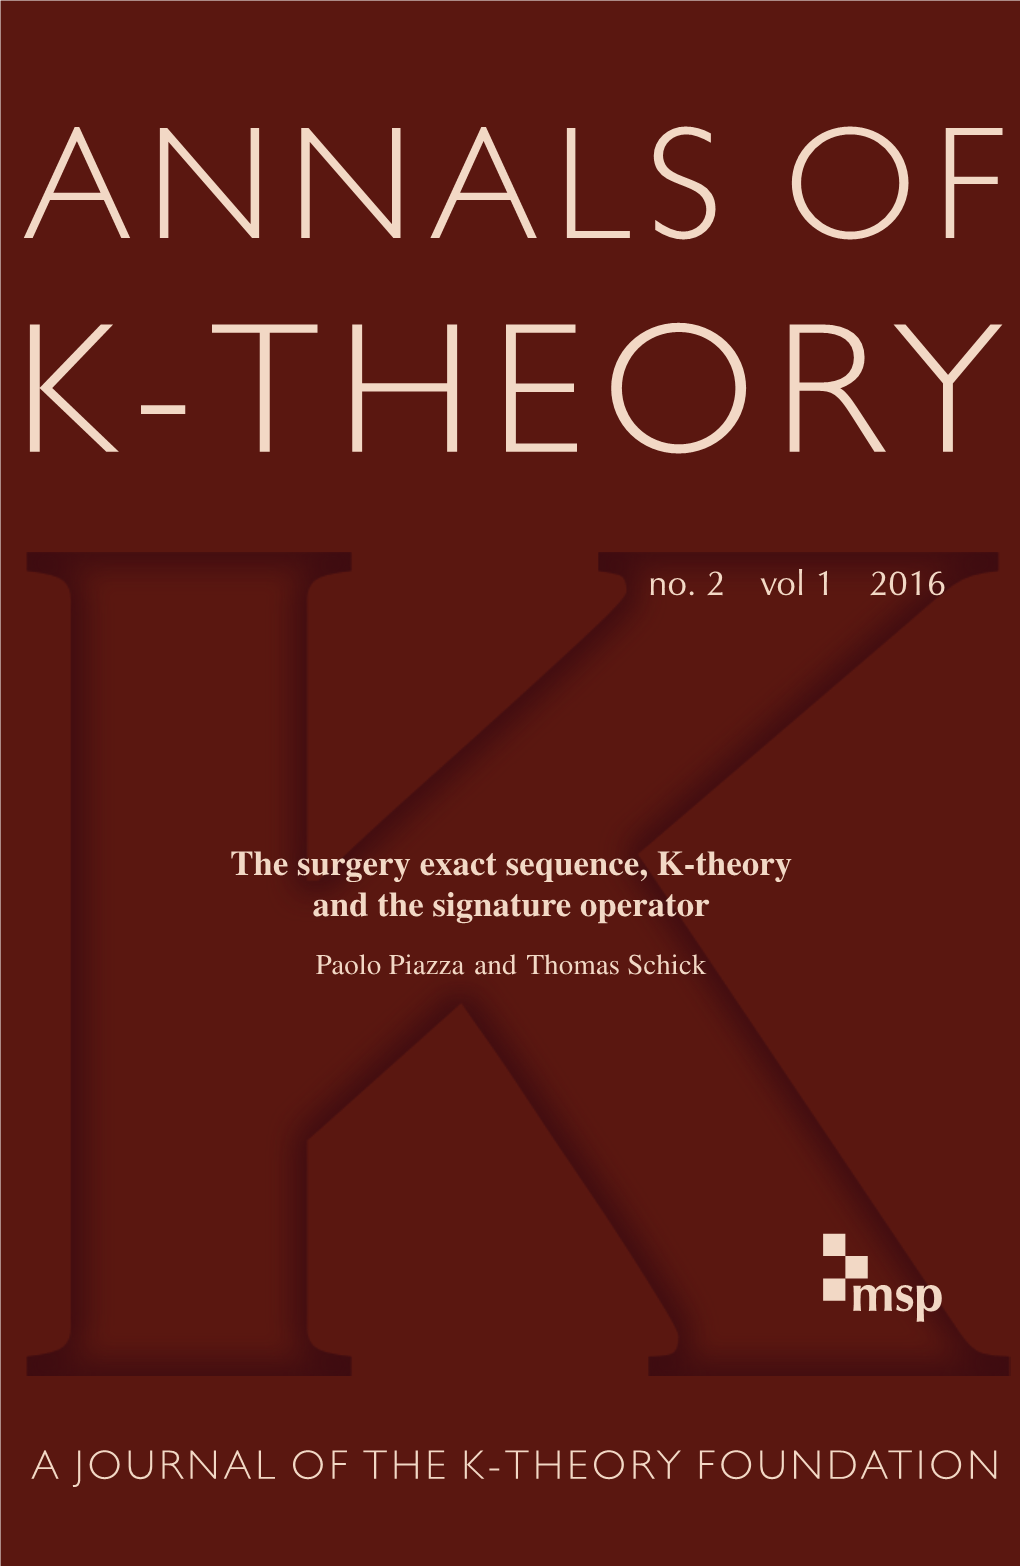 The Surgery Exact Sequence, K-Theory and the Signature Operator Paolo Piazza and Thomas Schick